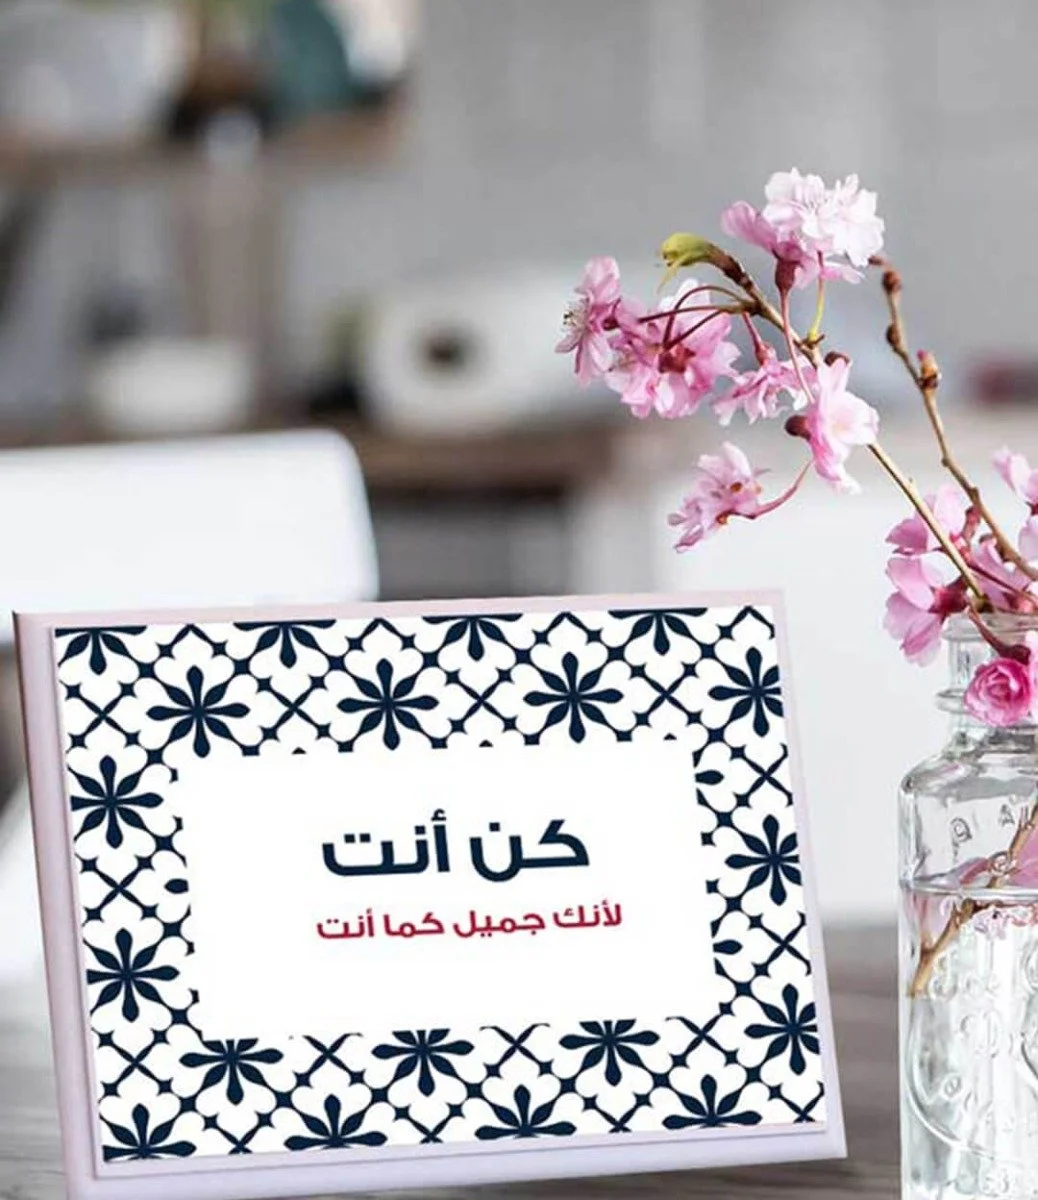 Wooden Plaque With An Arabic Motivational Quote